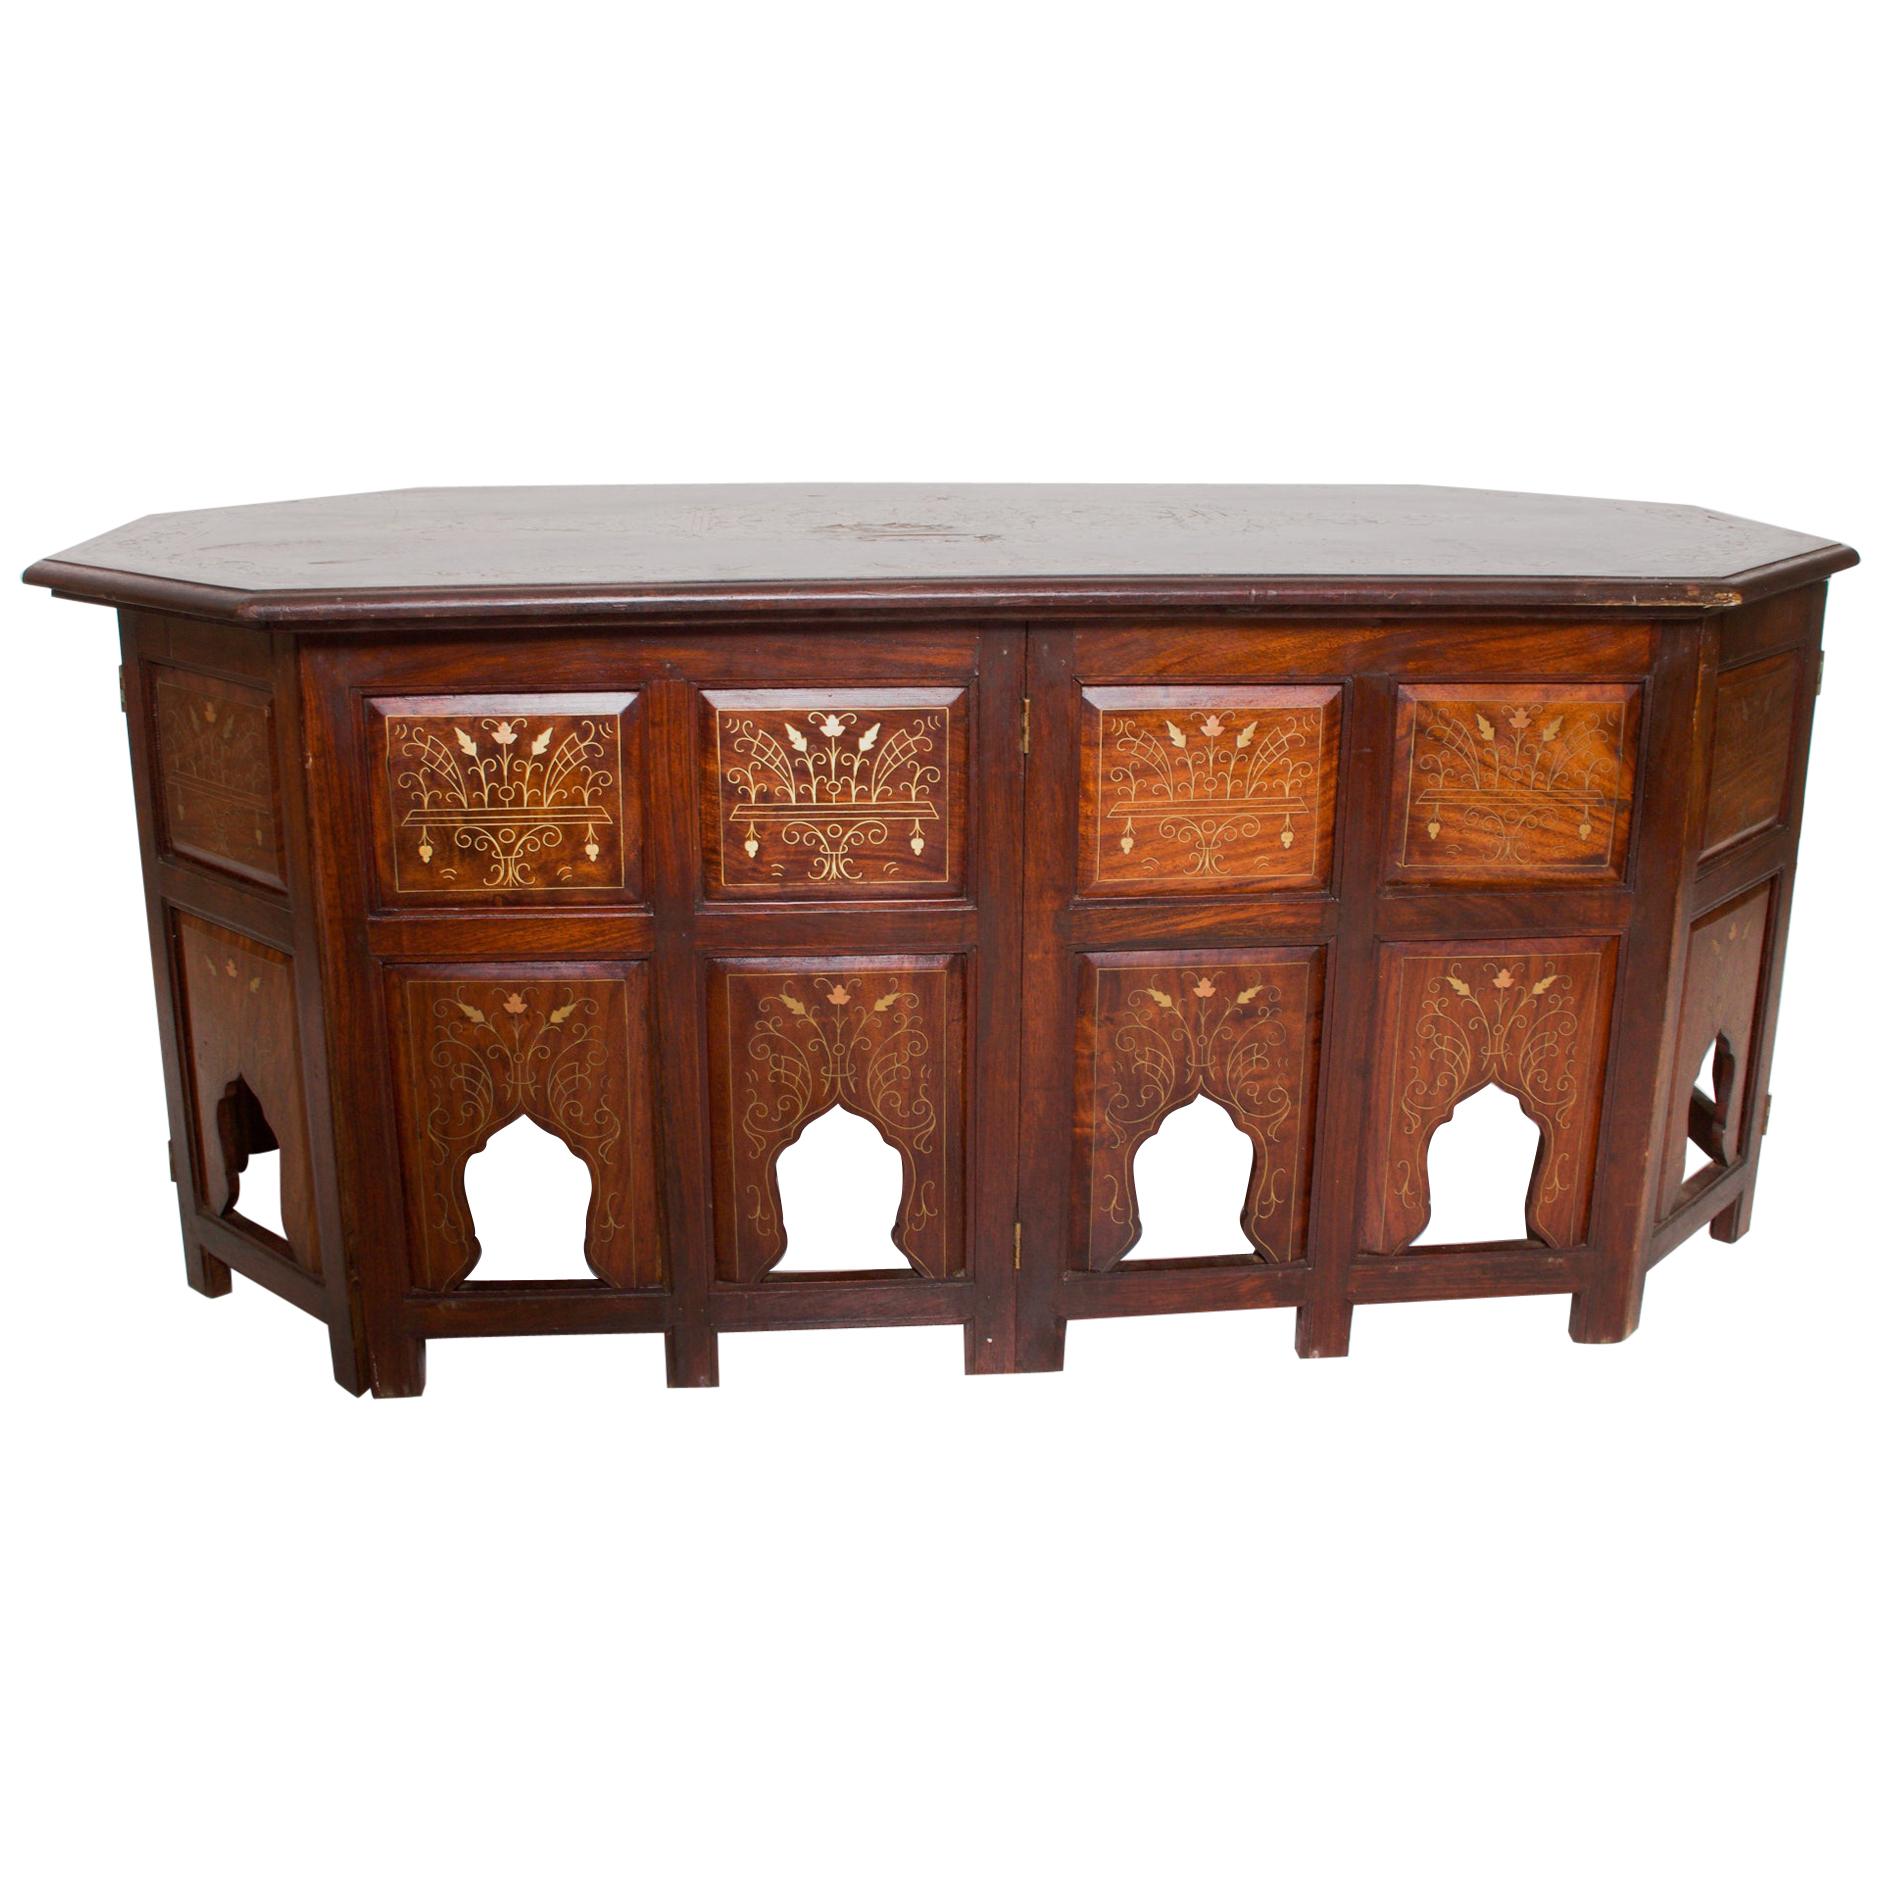 Coffee Table
Anglo-Indian Rosewood Coffee Table Bone Inlay elongated octagonal shape.
Intricate carved bone folding collapsible concertina base. Graceful design with architectural arches.
Dimensions: 48W x 23.5D x 21 H
Original Unrestored Vintage